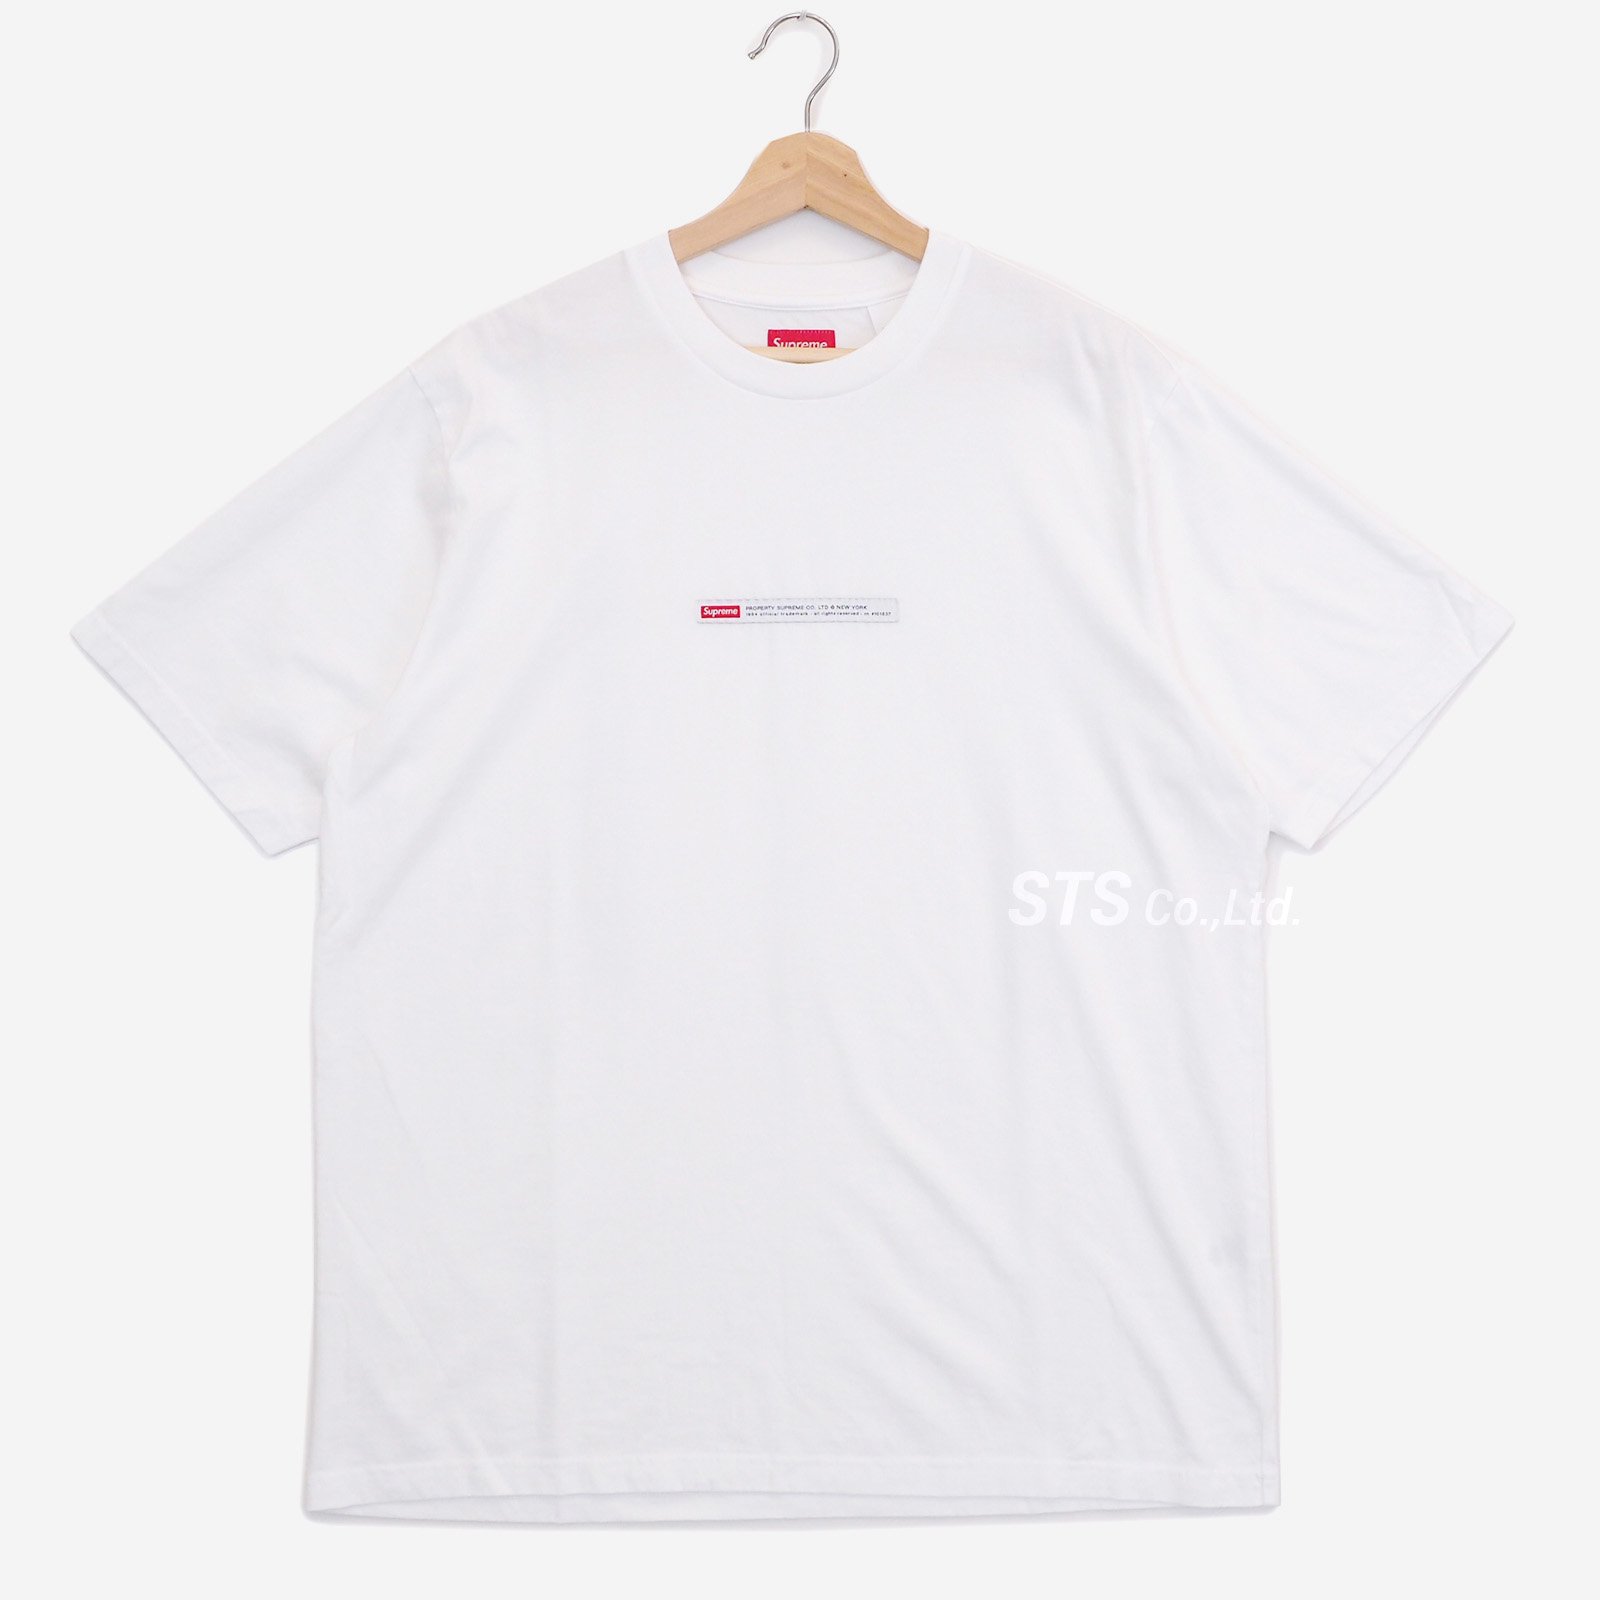 L Supreme Property Label S/S Top Tシャツ - Tシャツ/カットソー(半袖 